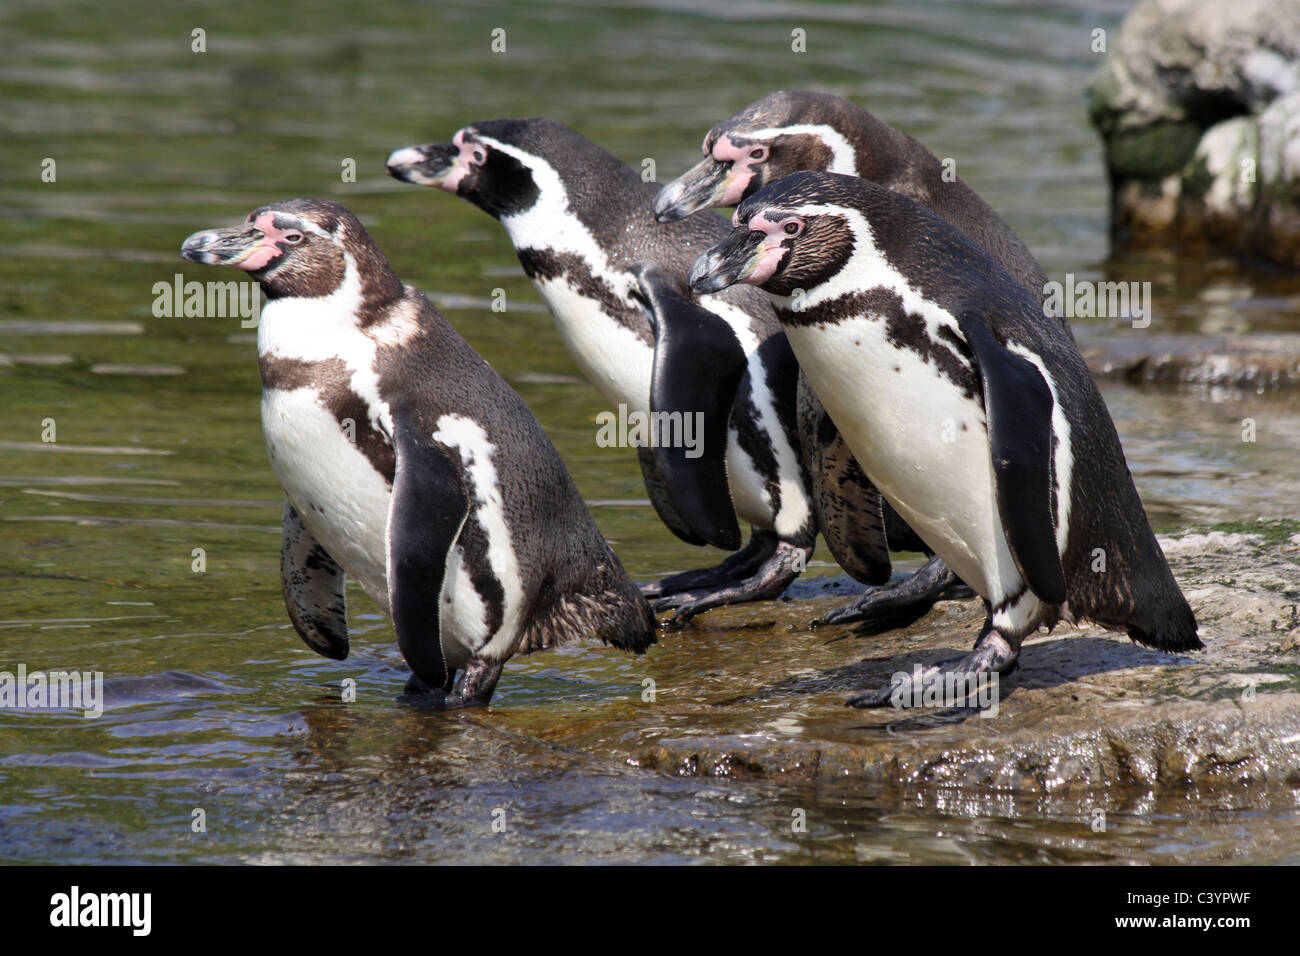 Group Of Humboldt Penguins Spheniscus humboldti About To Dive Into Water Stock Photo